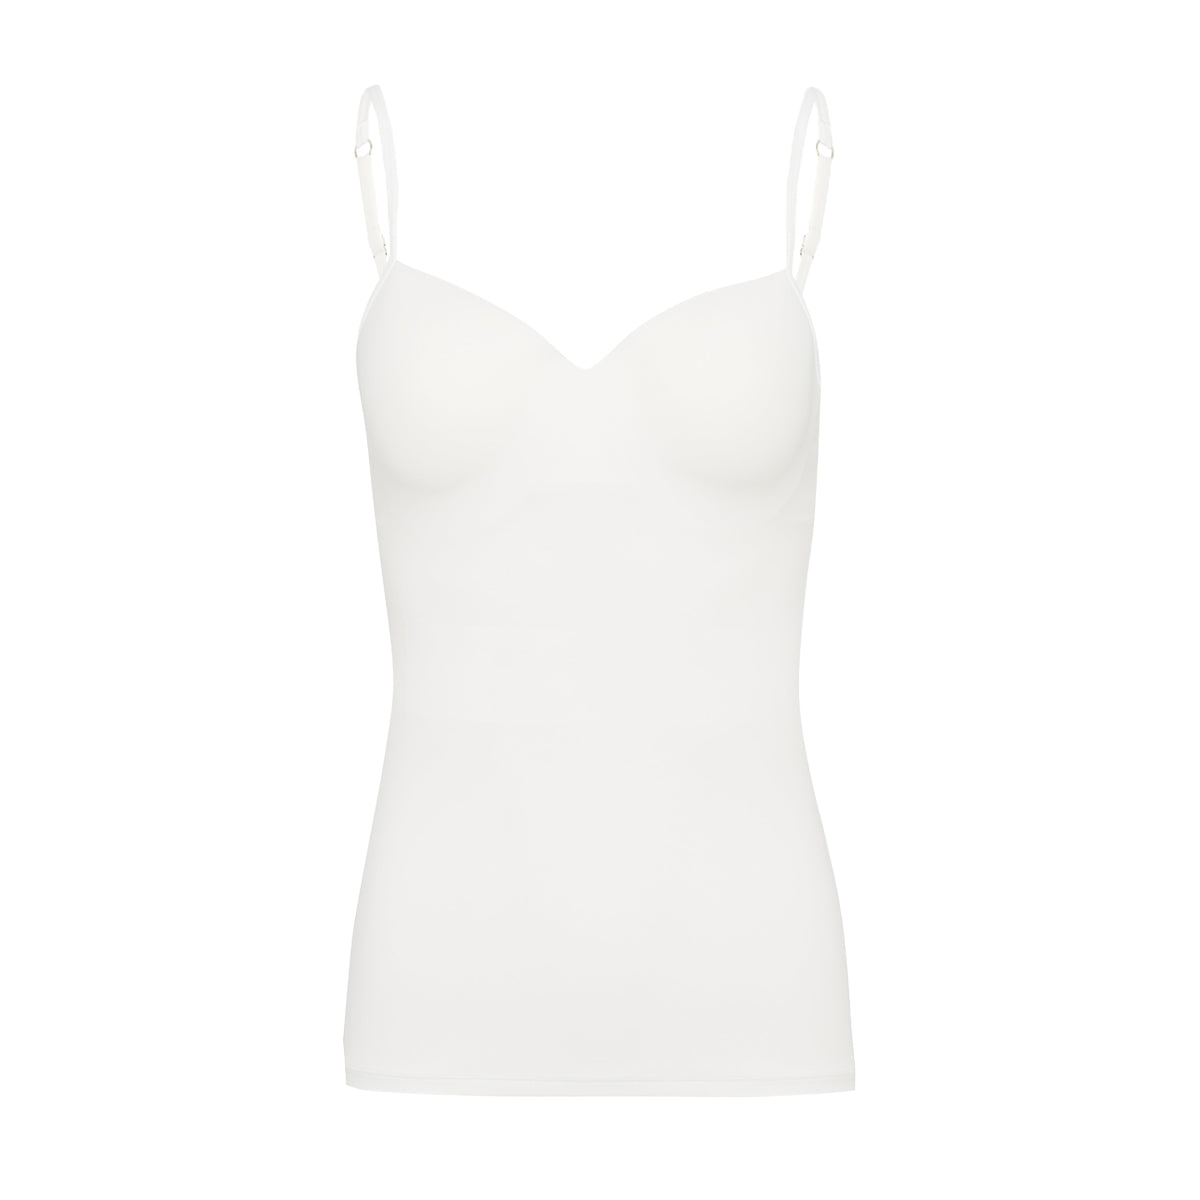 Allure Padded Bra Camisole - For Her from The Luxe Company UK